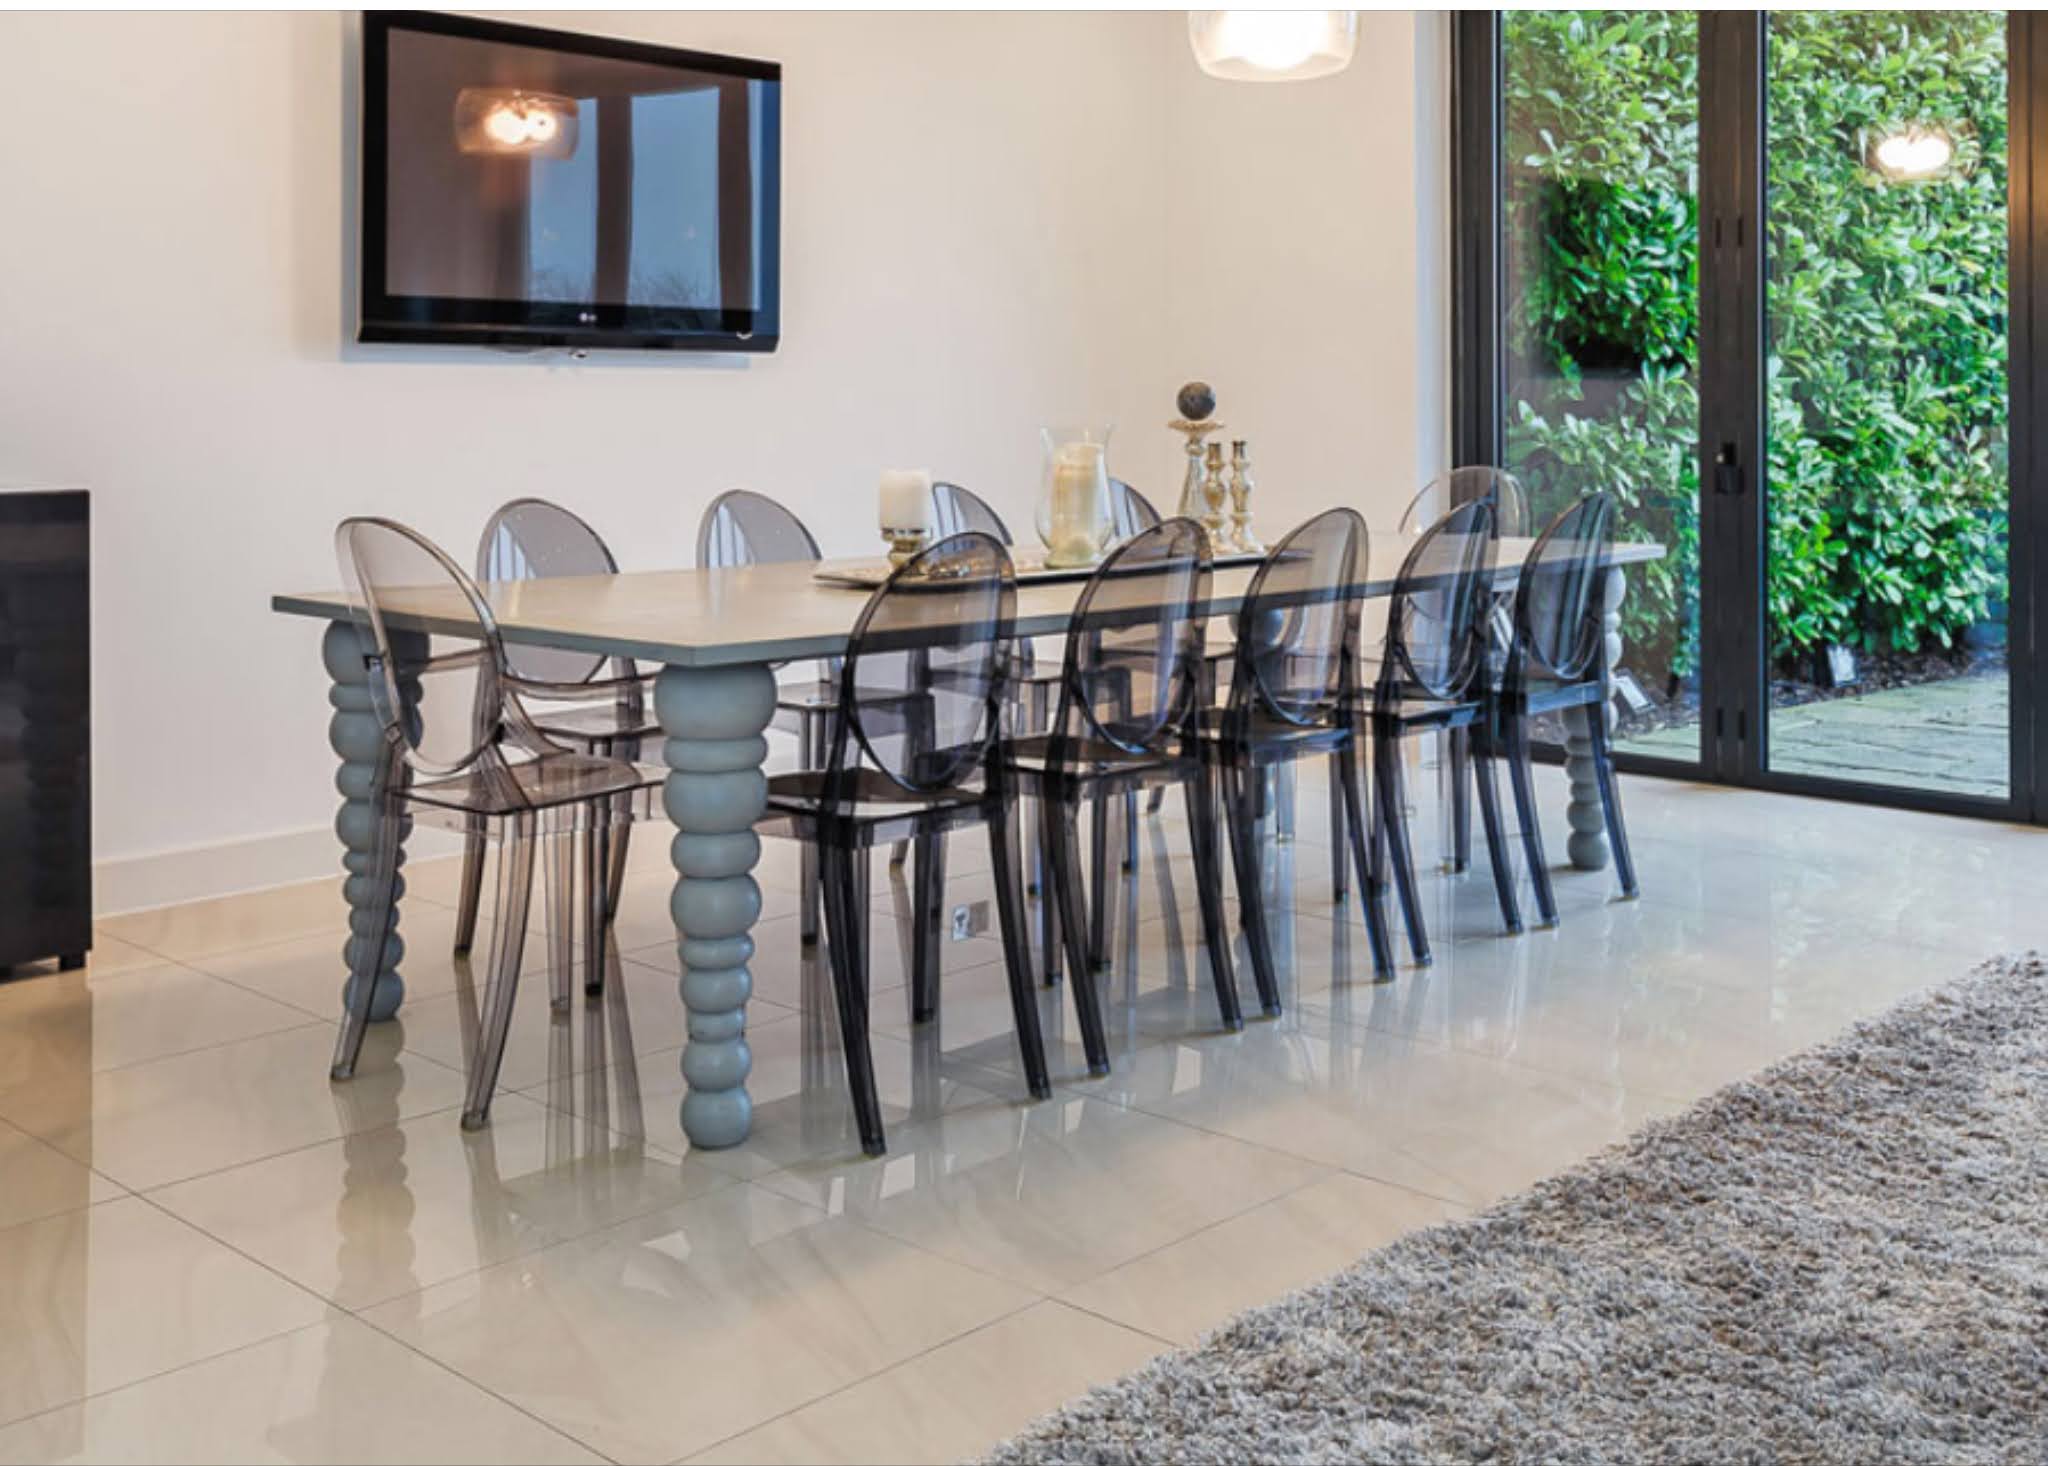 Dining table client led design fir the Grand Design Newport Foley house 2008: